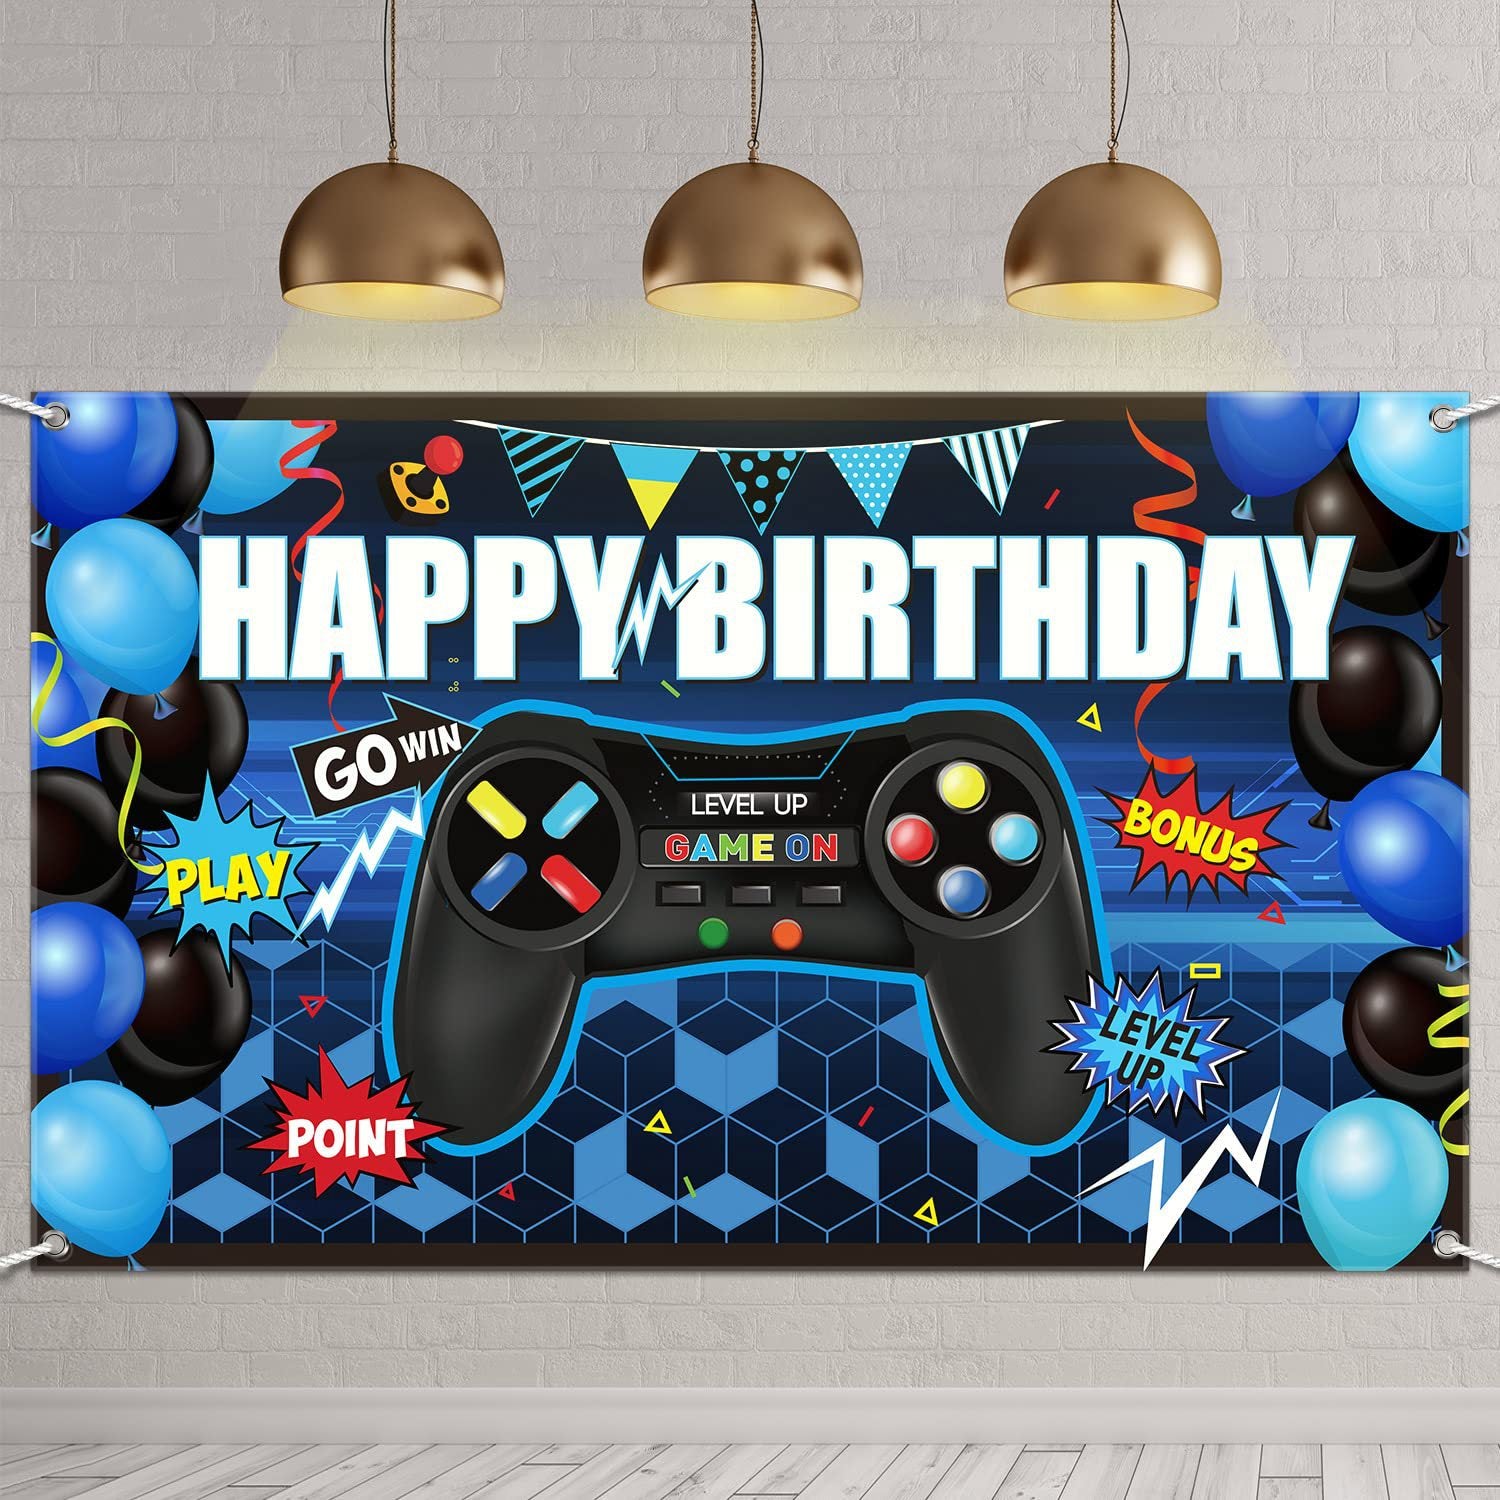 Bulk 10 Pcs Happy Birthday Banners for Game Theme Birthday Party Background Banner Party Supplies Wholesale